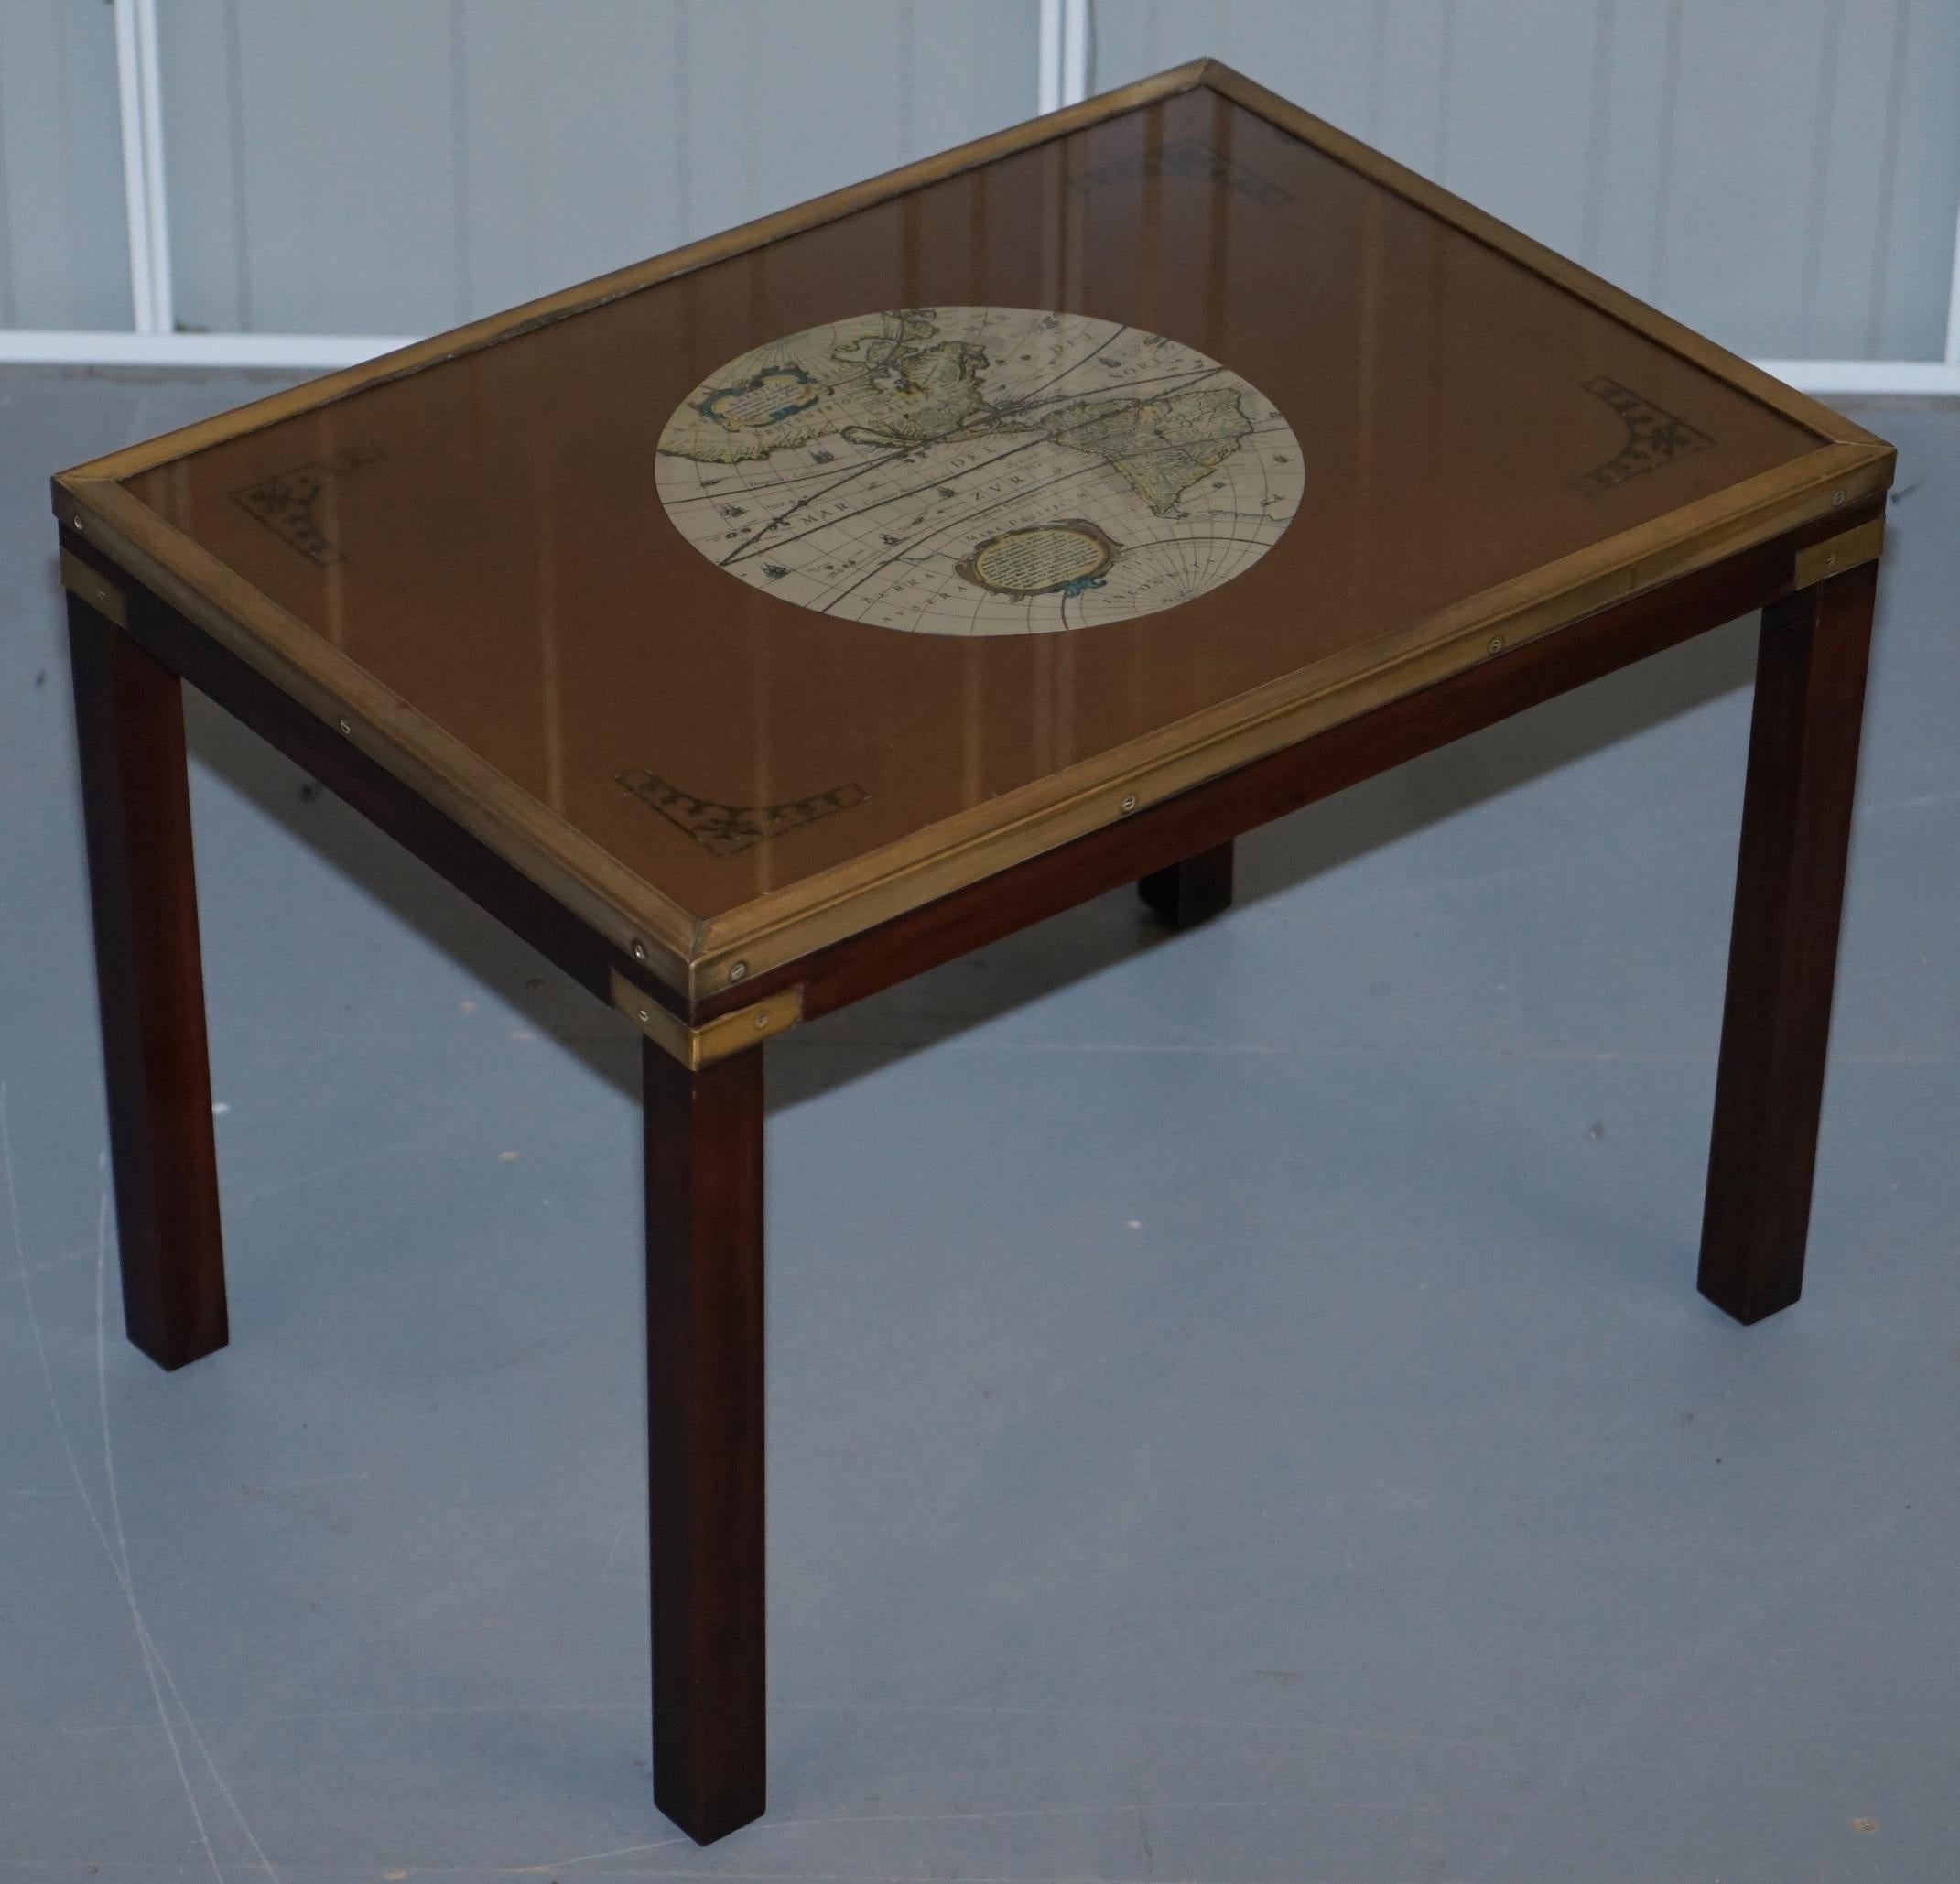 We are delighted to offer for sale this lovely nest of three side tables with world maps detailing

A nice decorative set, each one has a good quality print of a world map. They are made in the military campaign style so brass fittings and in